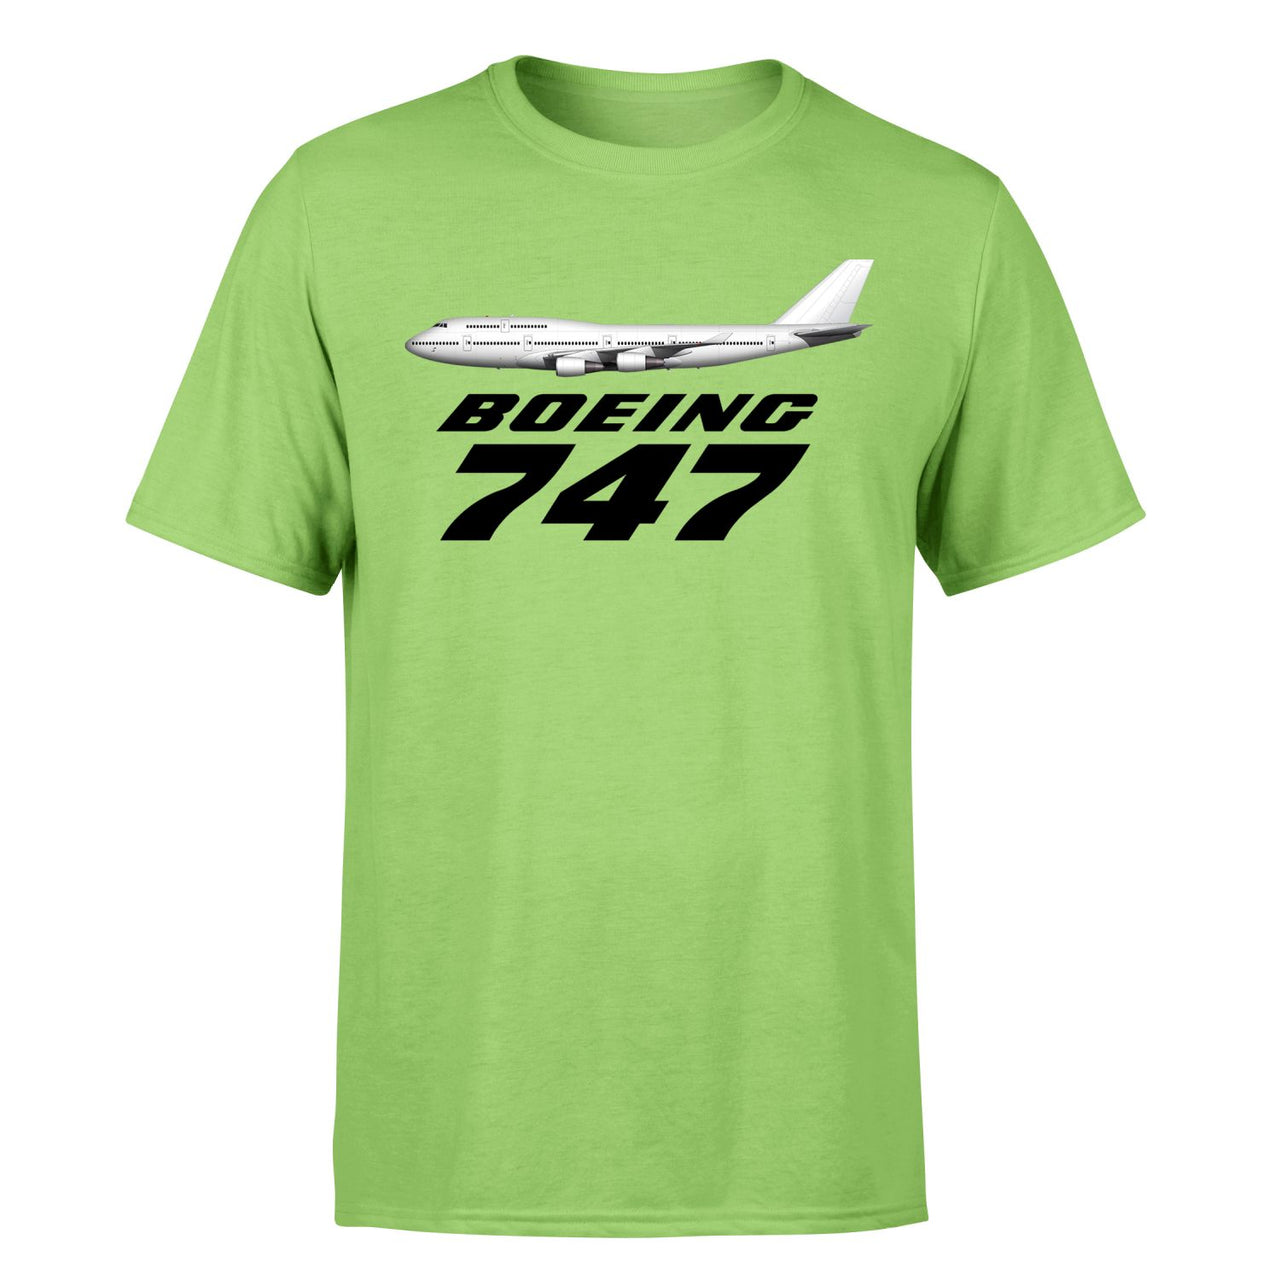 The Boeing 747 Designed T-Shirts